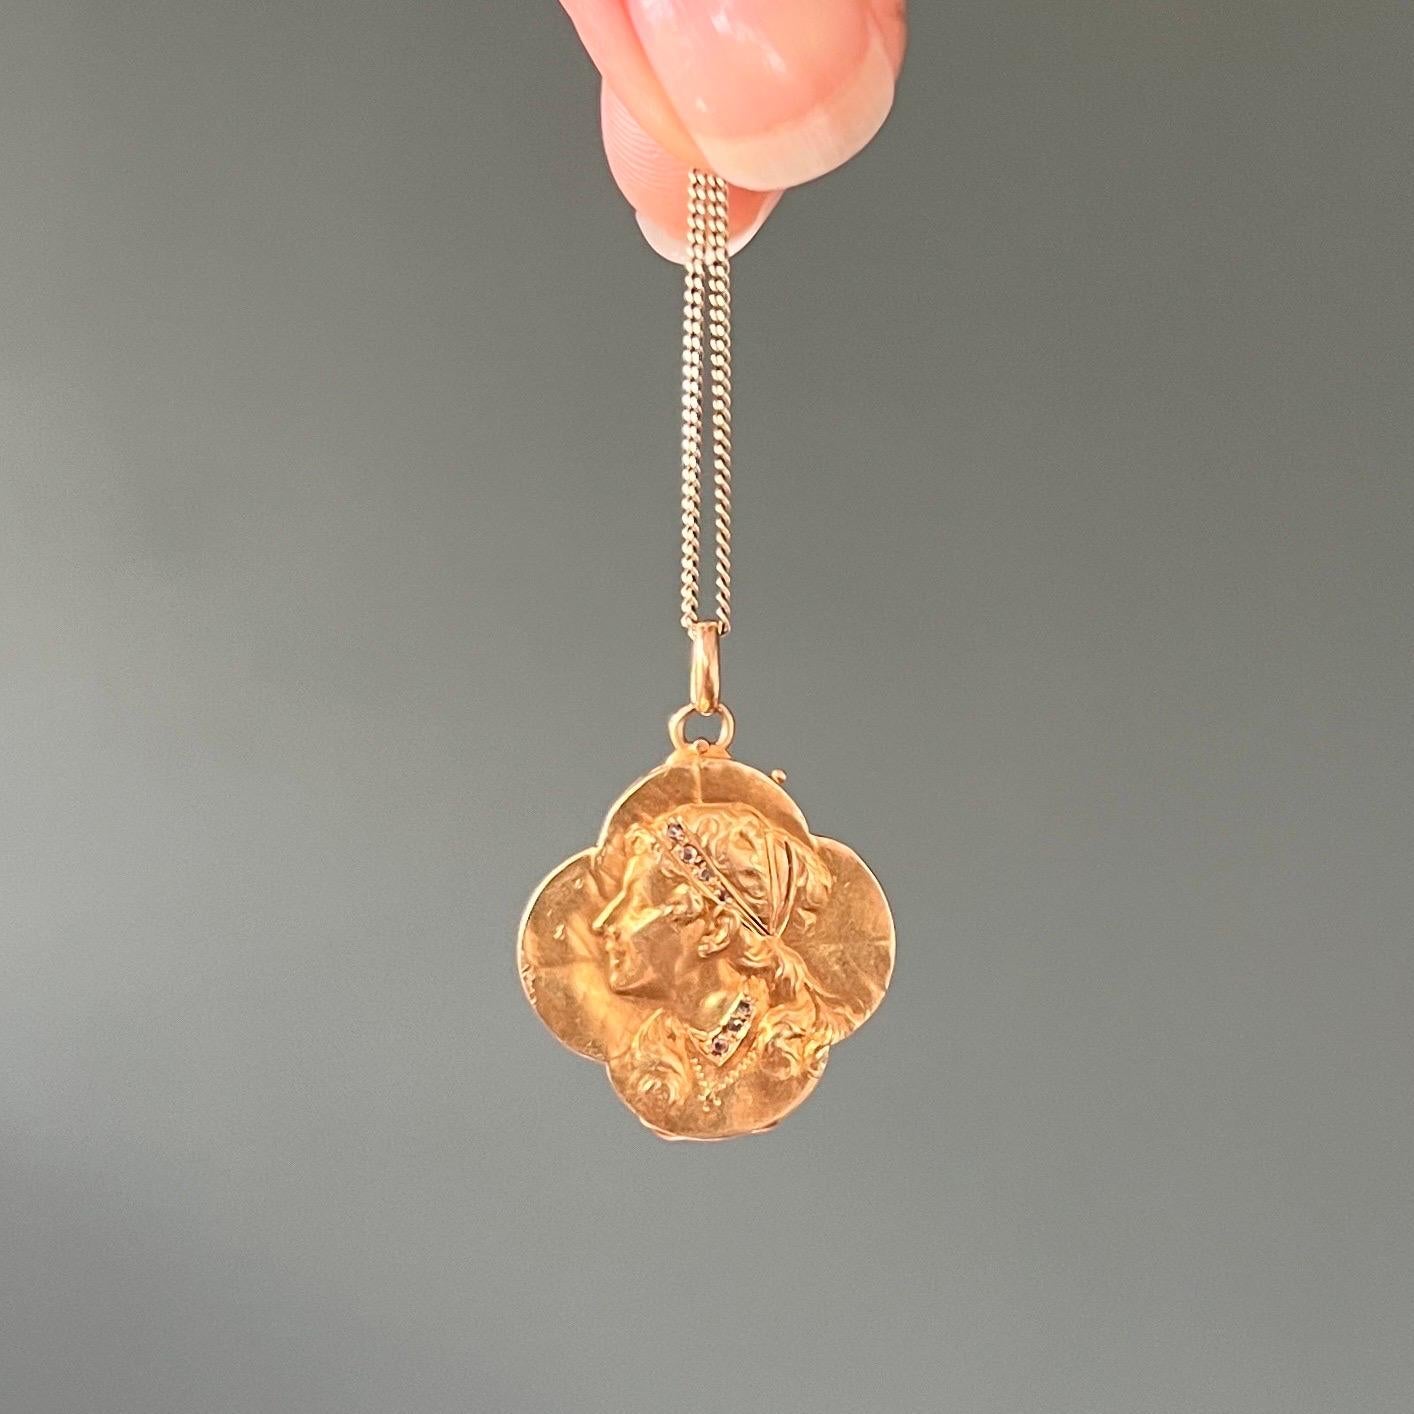 An antique four-leaf clover locket pendant dating back to the Art Nouveau movement, 1890-1914. The beautiful good luck pendant is created in 14 karat yellow gold in the shape of a four-leaf clover, depicting a female portrait in a bass-relief